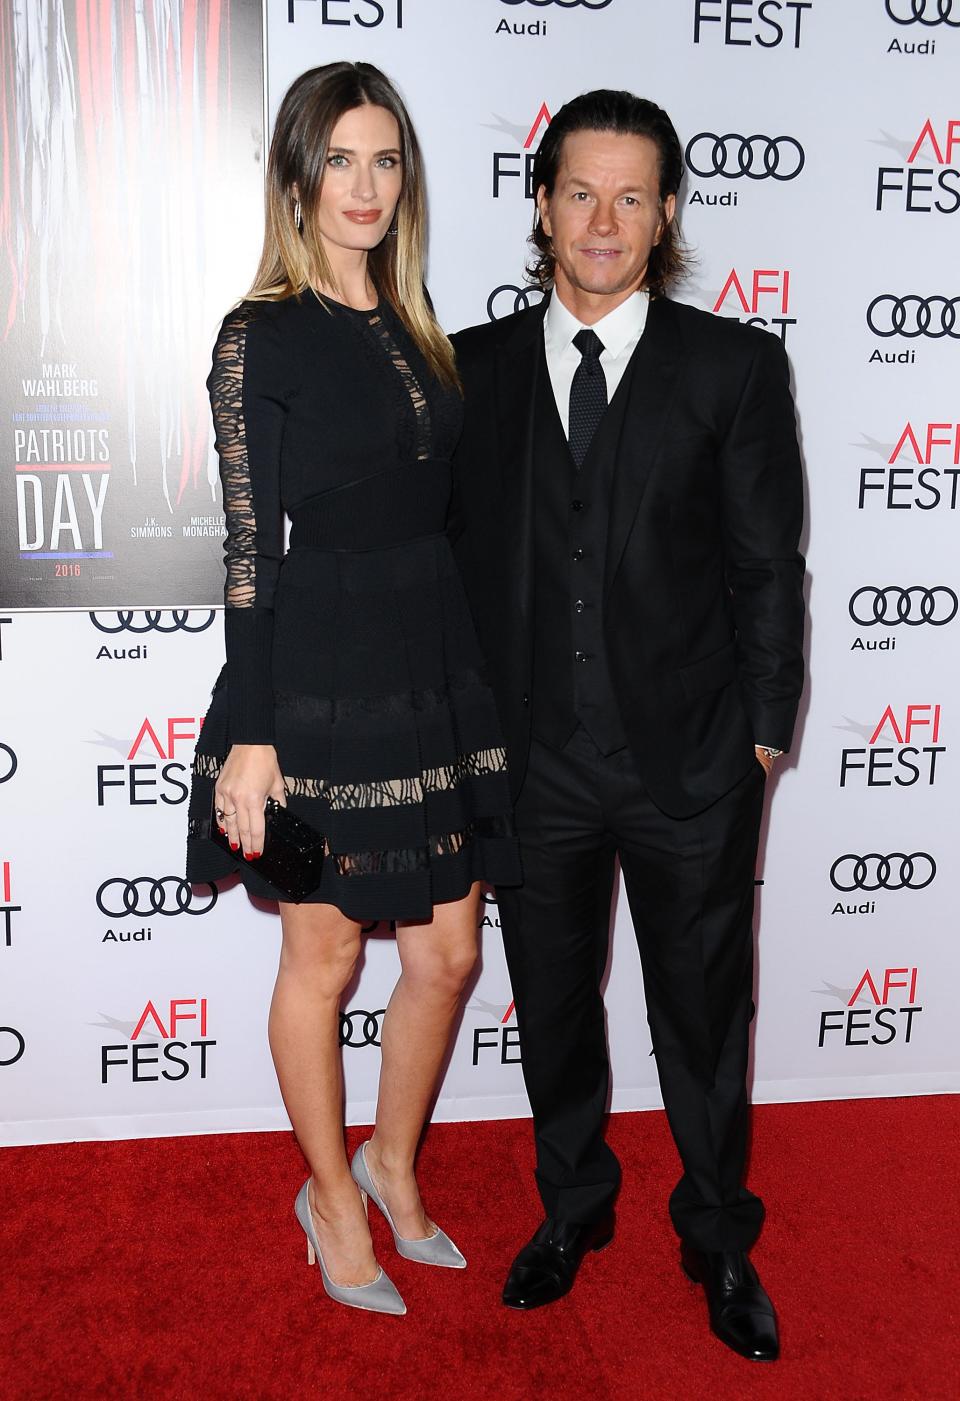 Rhea Durham in a black mini dress and heels standing taller than Mark Wahlberg in a black suit.